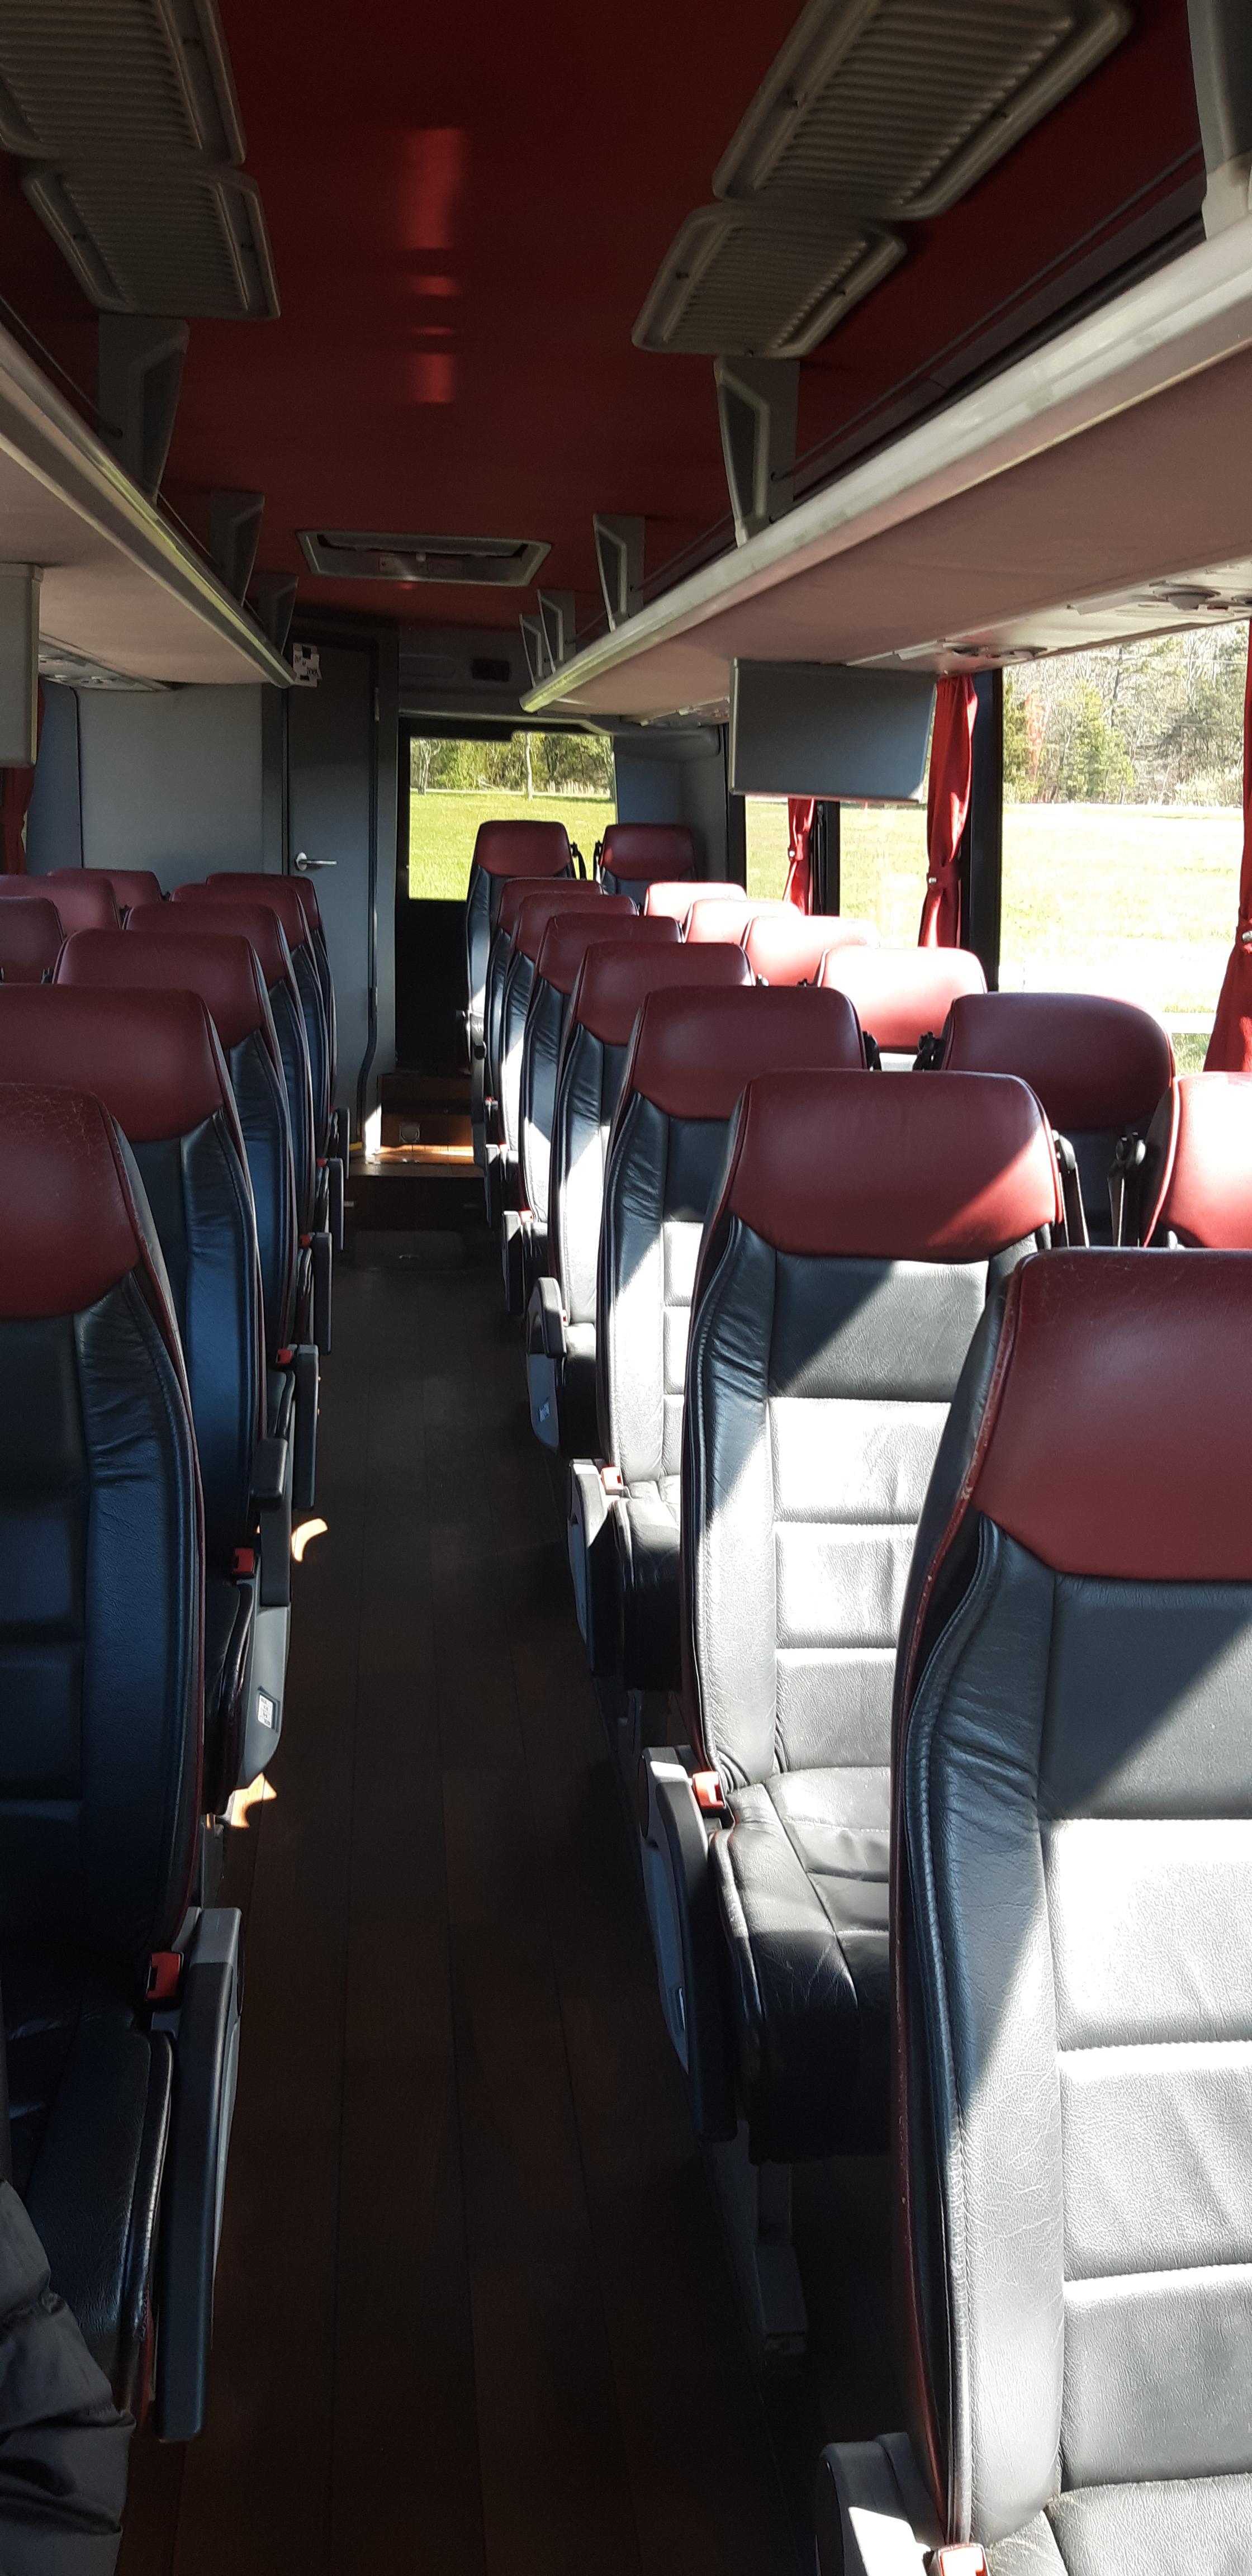 Larger groups will appreciate the comfort during extended travel